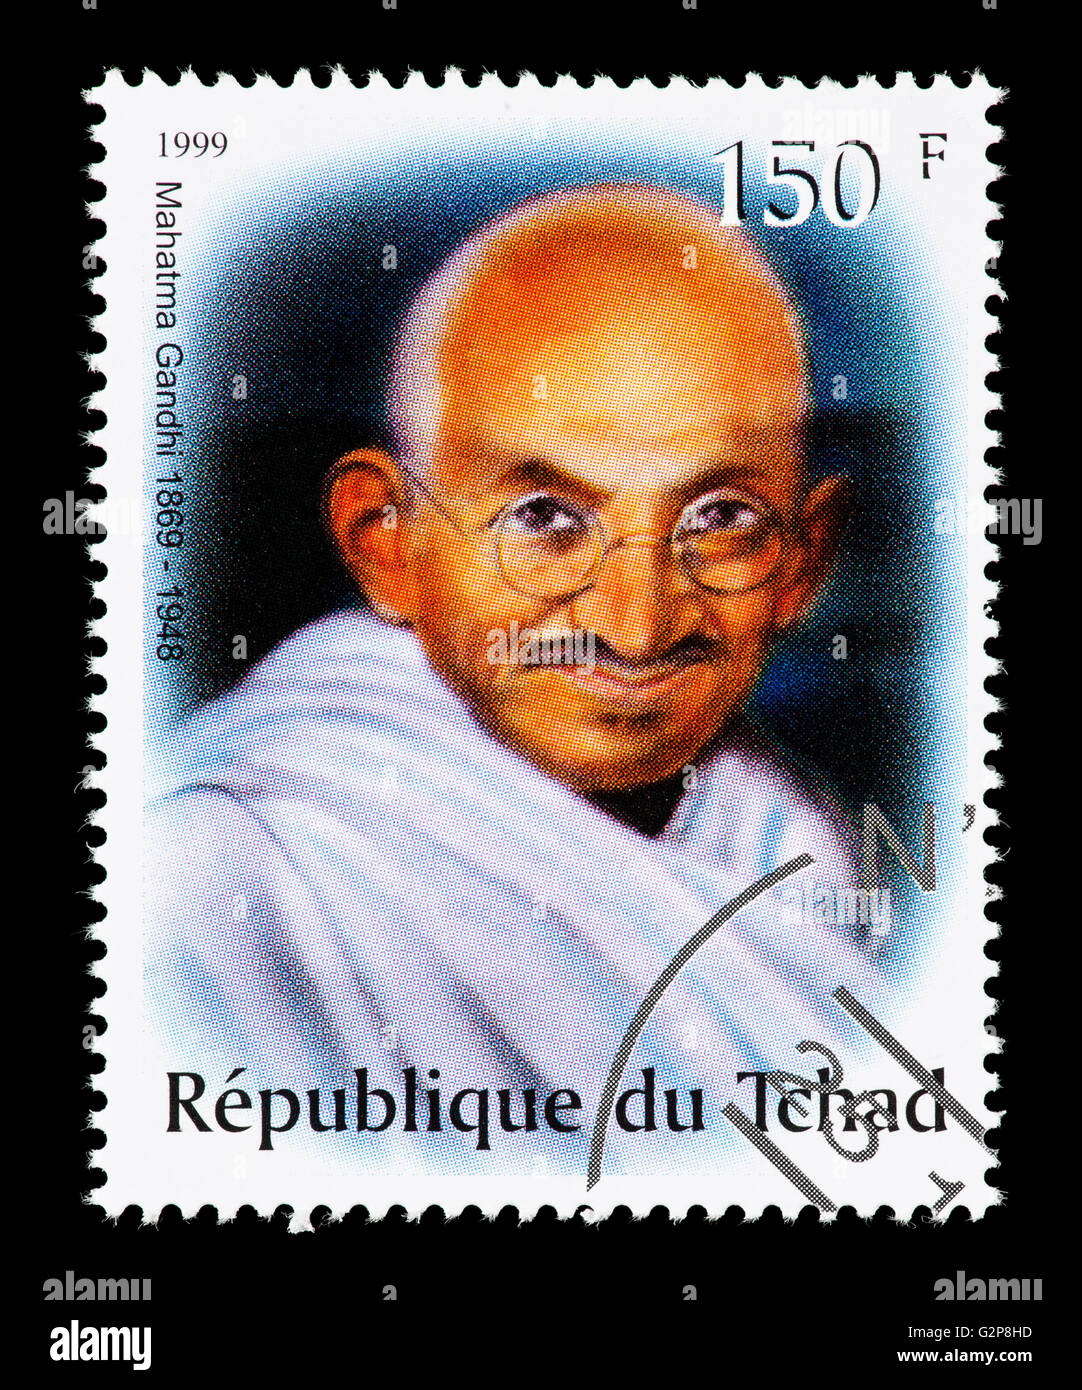 Postage stamp from Chad depicting Mohandas Karamchand Gandhi, Indian independence movement leader. Stock Photo